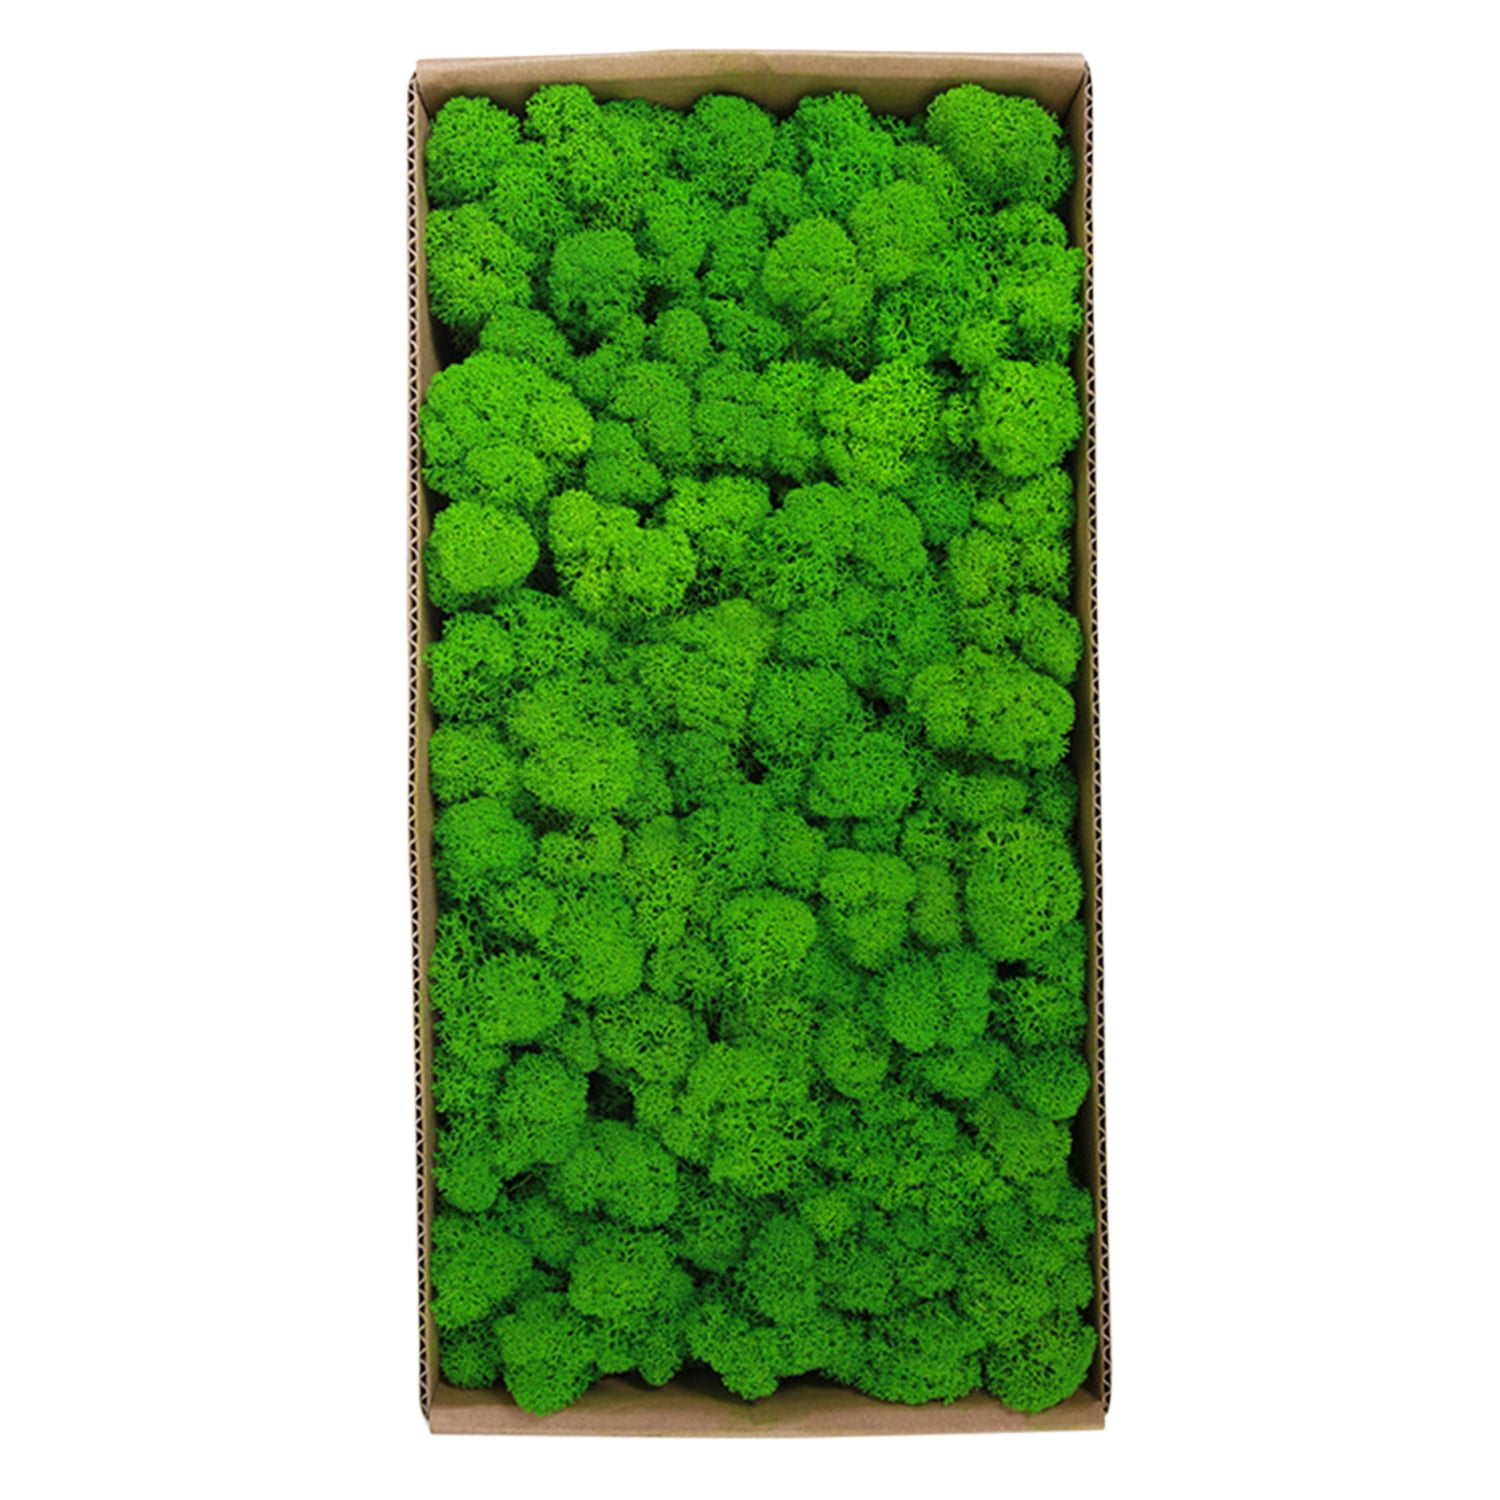 GREEN 18" x 16" Natural Preserved Moss Sheet Wedding Party Crafts Decorations 